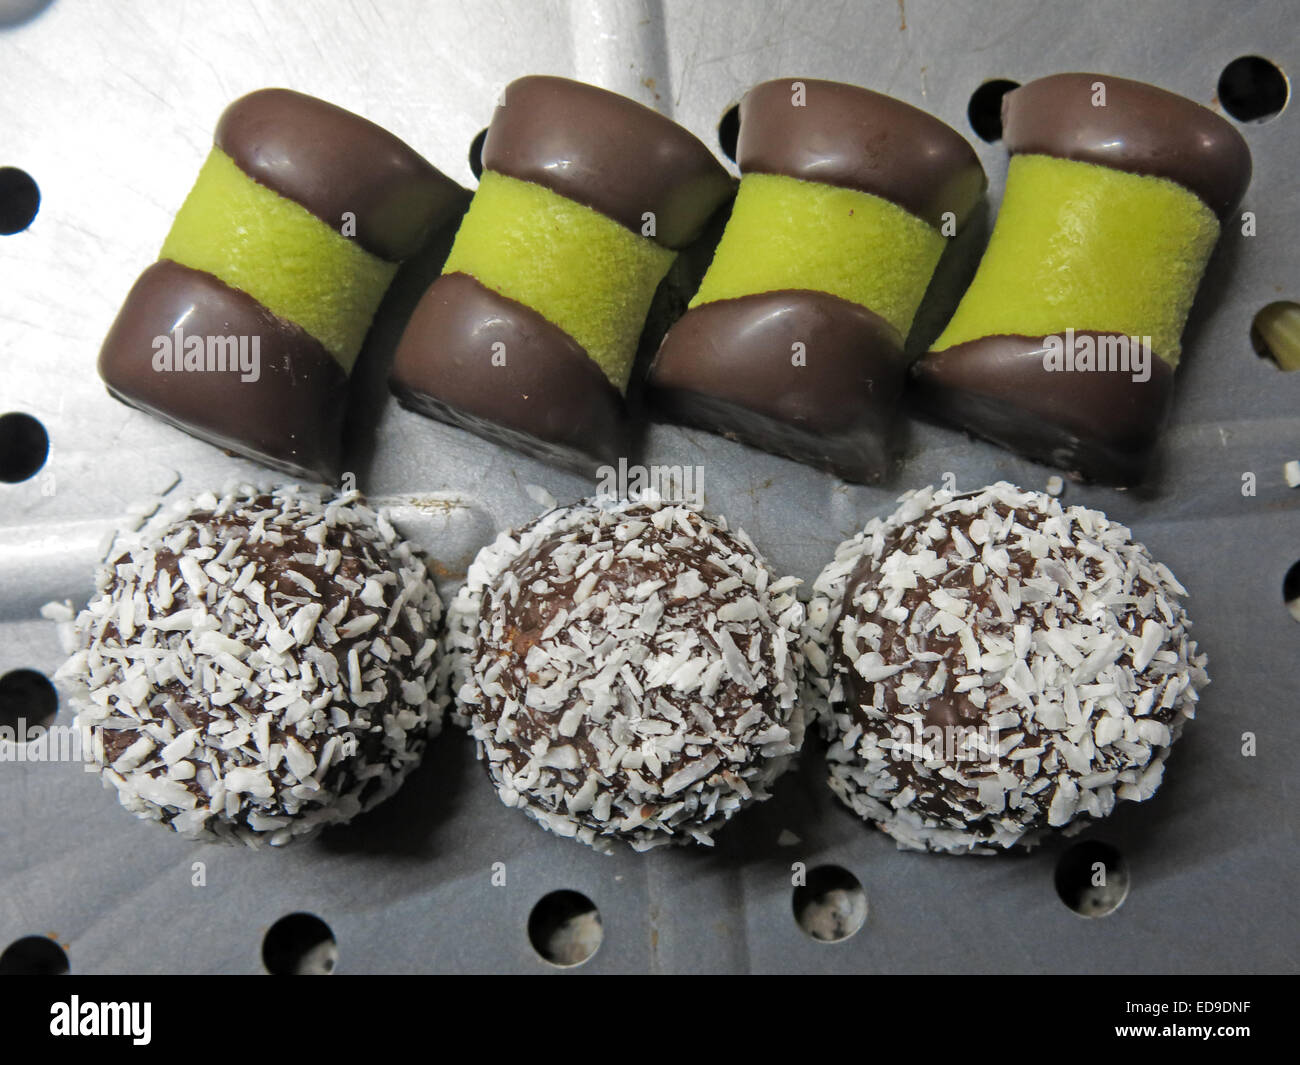 Page 2 - Swedish Pastry High Resolution Stock Photography and Images - Alamy